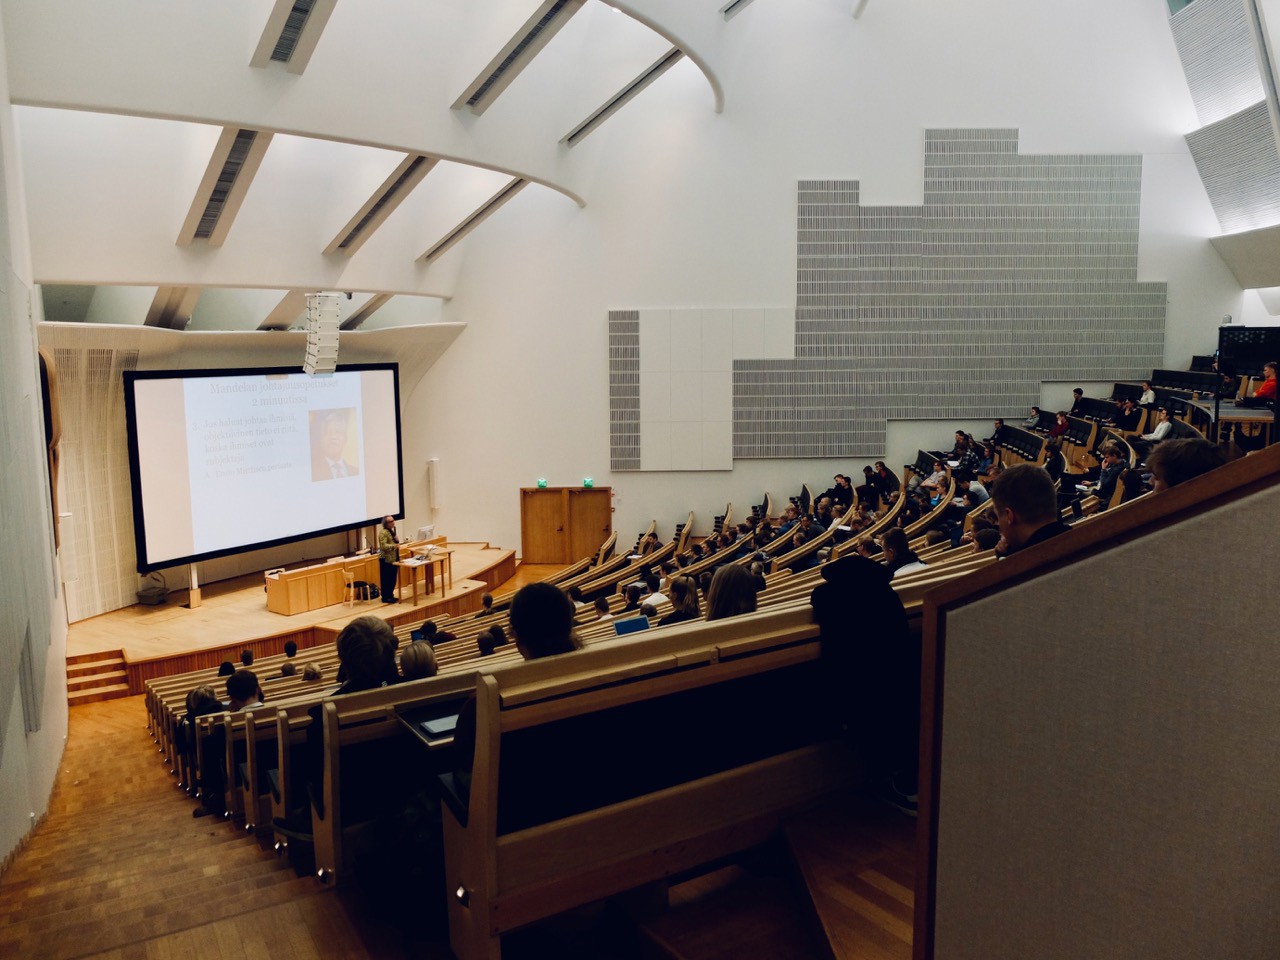 A conference hall at a university